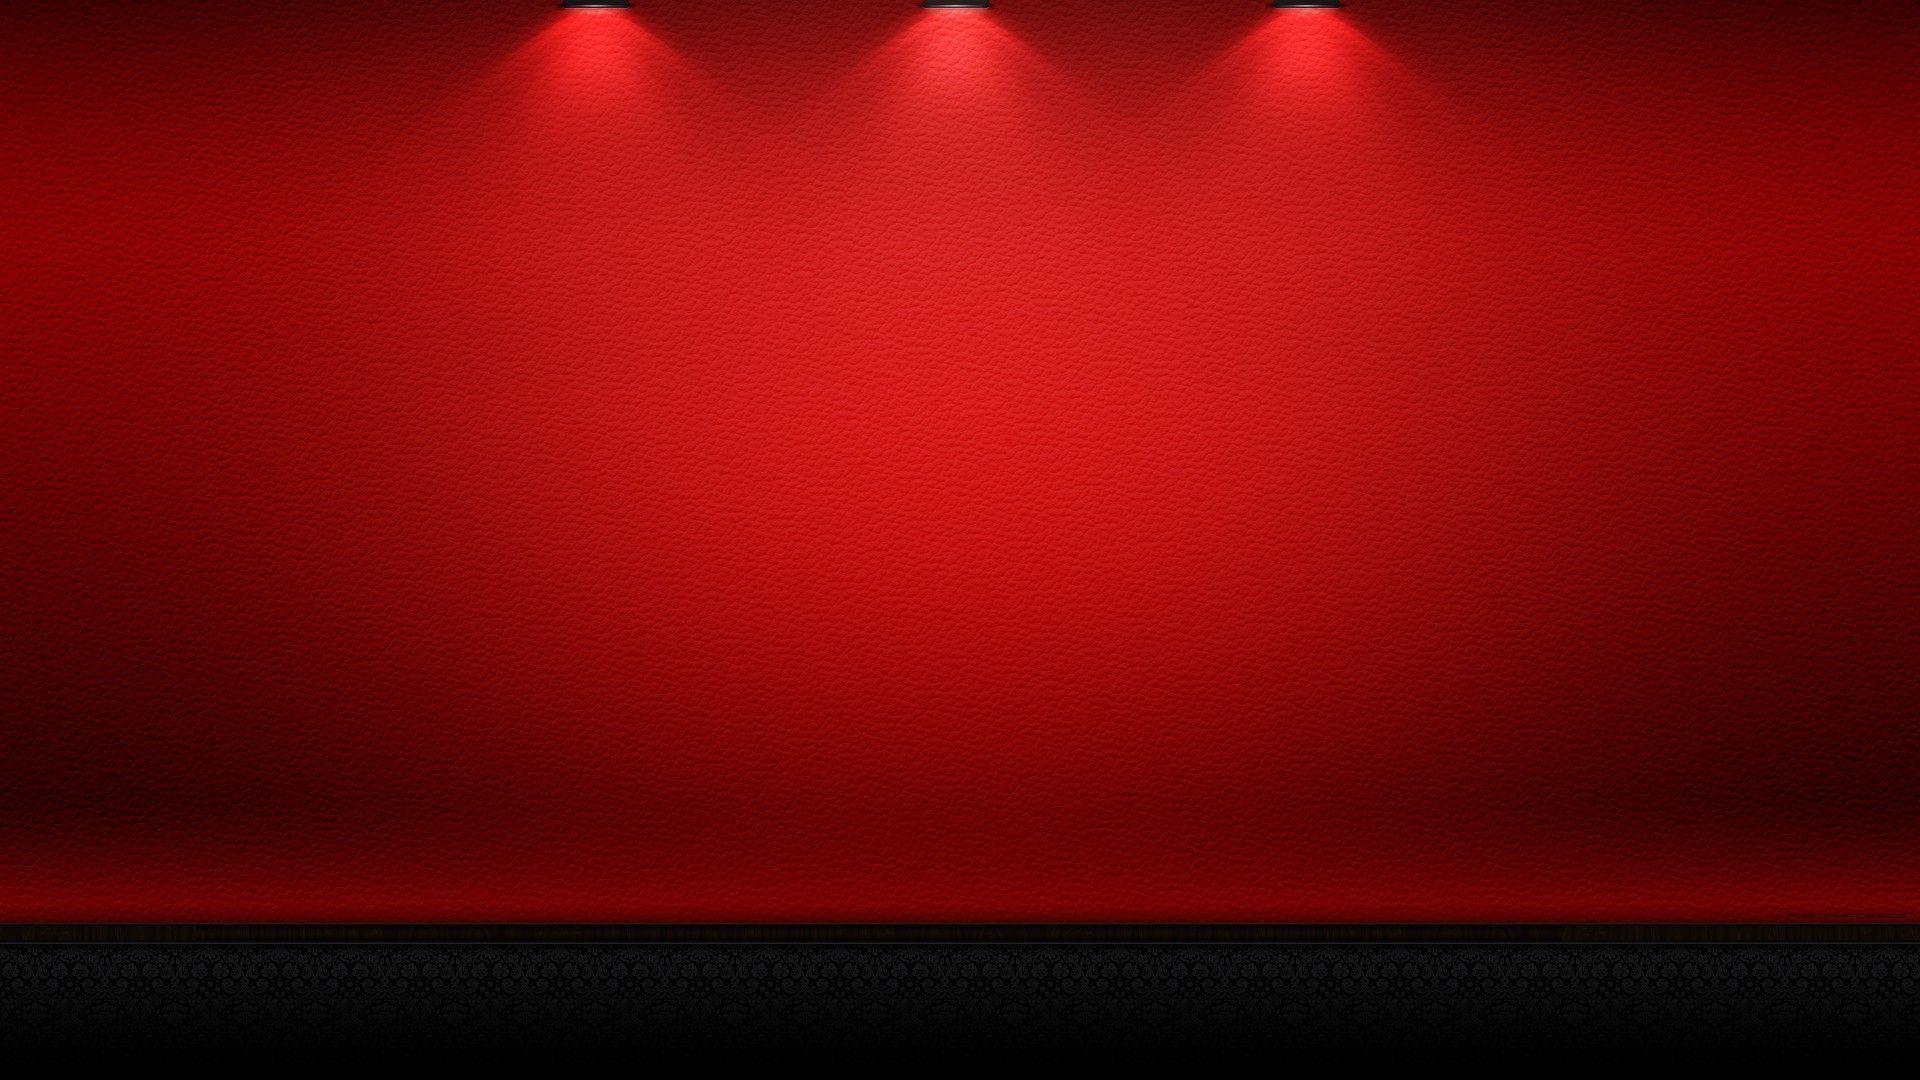 Red Plain Wall With Lighting On Up HD Wallpaper